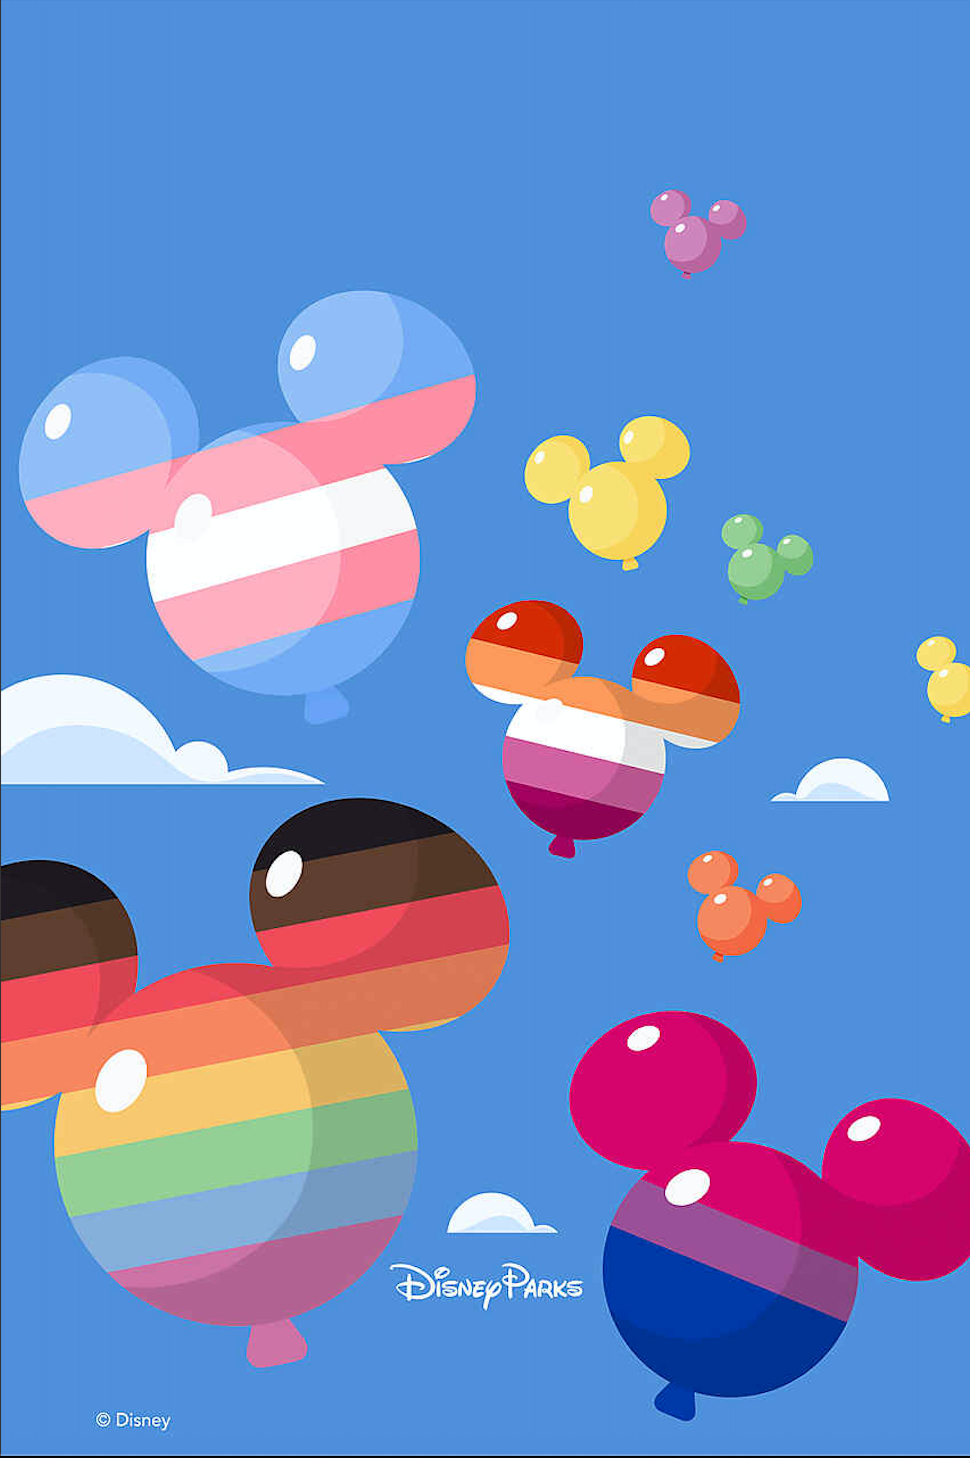 5 Disney Pride Wallpapers for Your Phone | the disney food blog